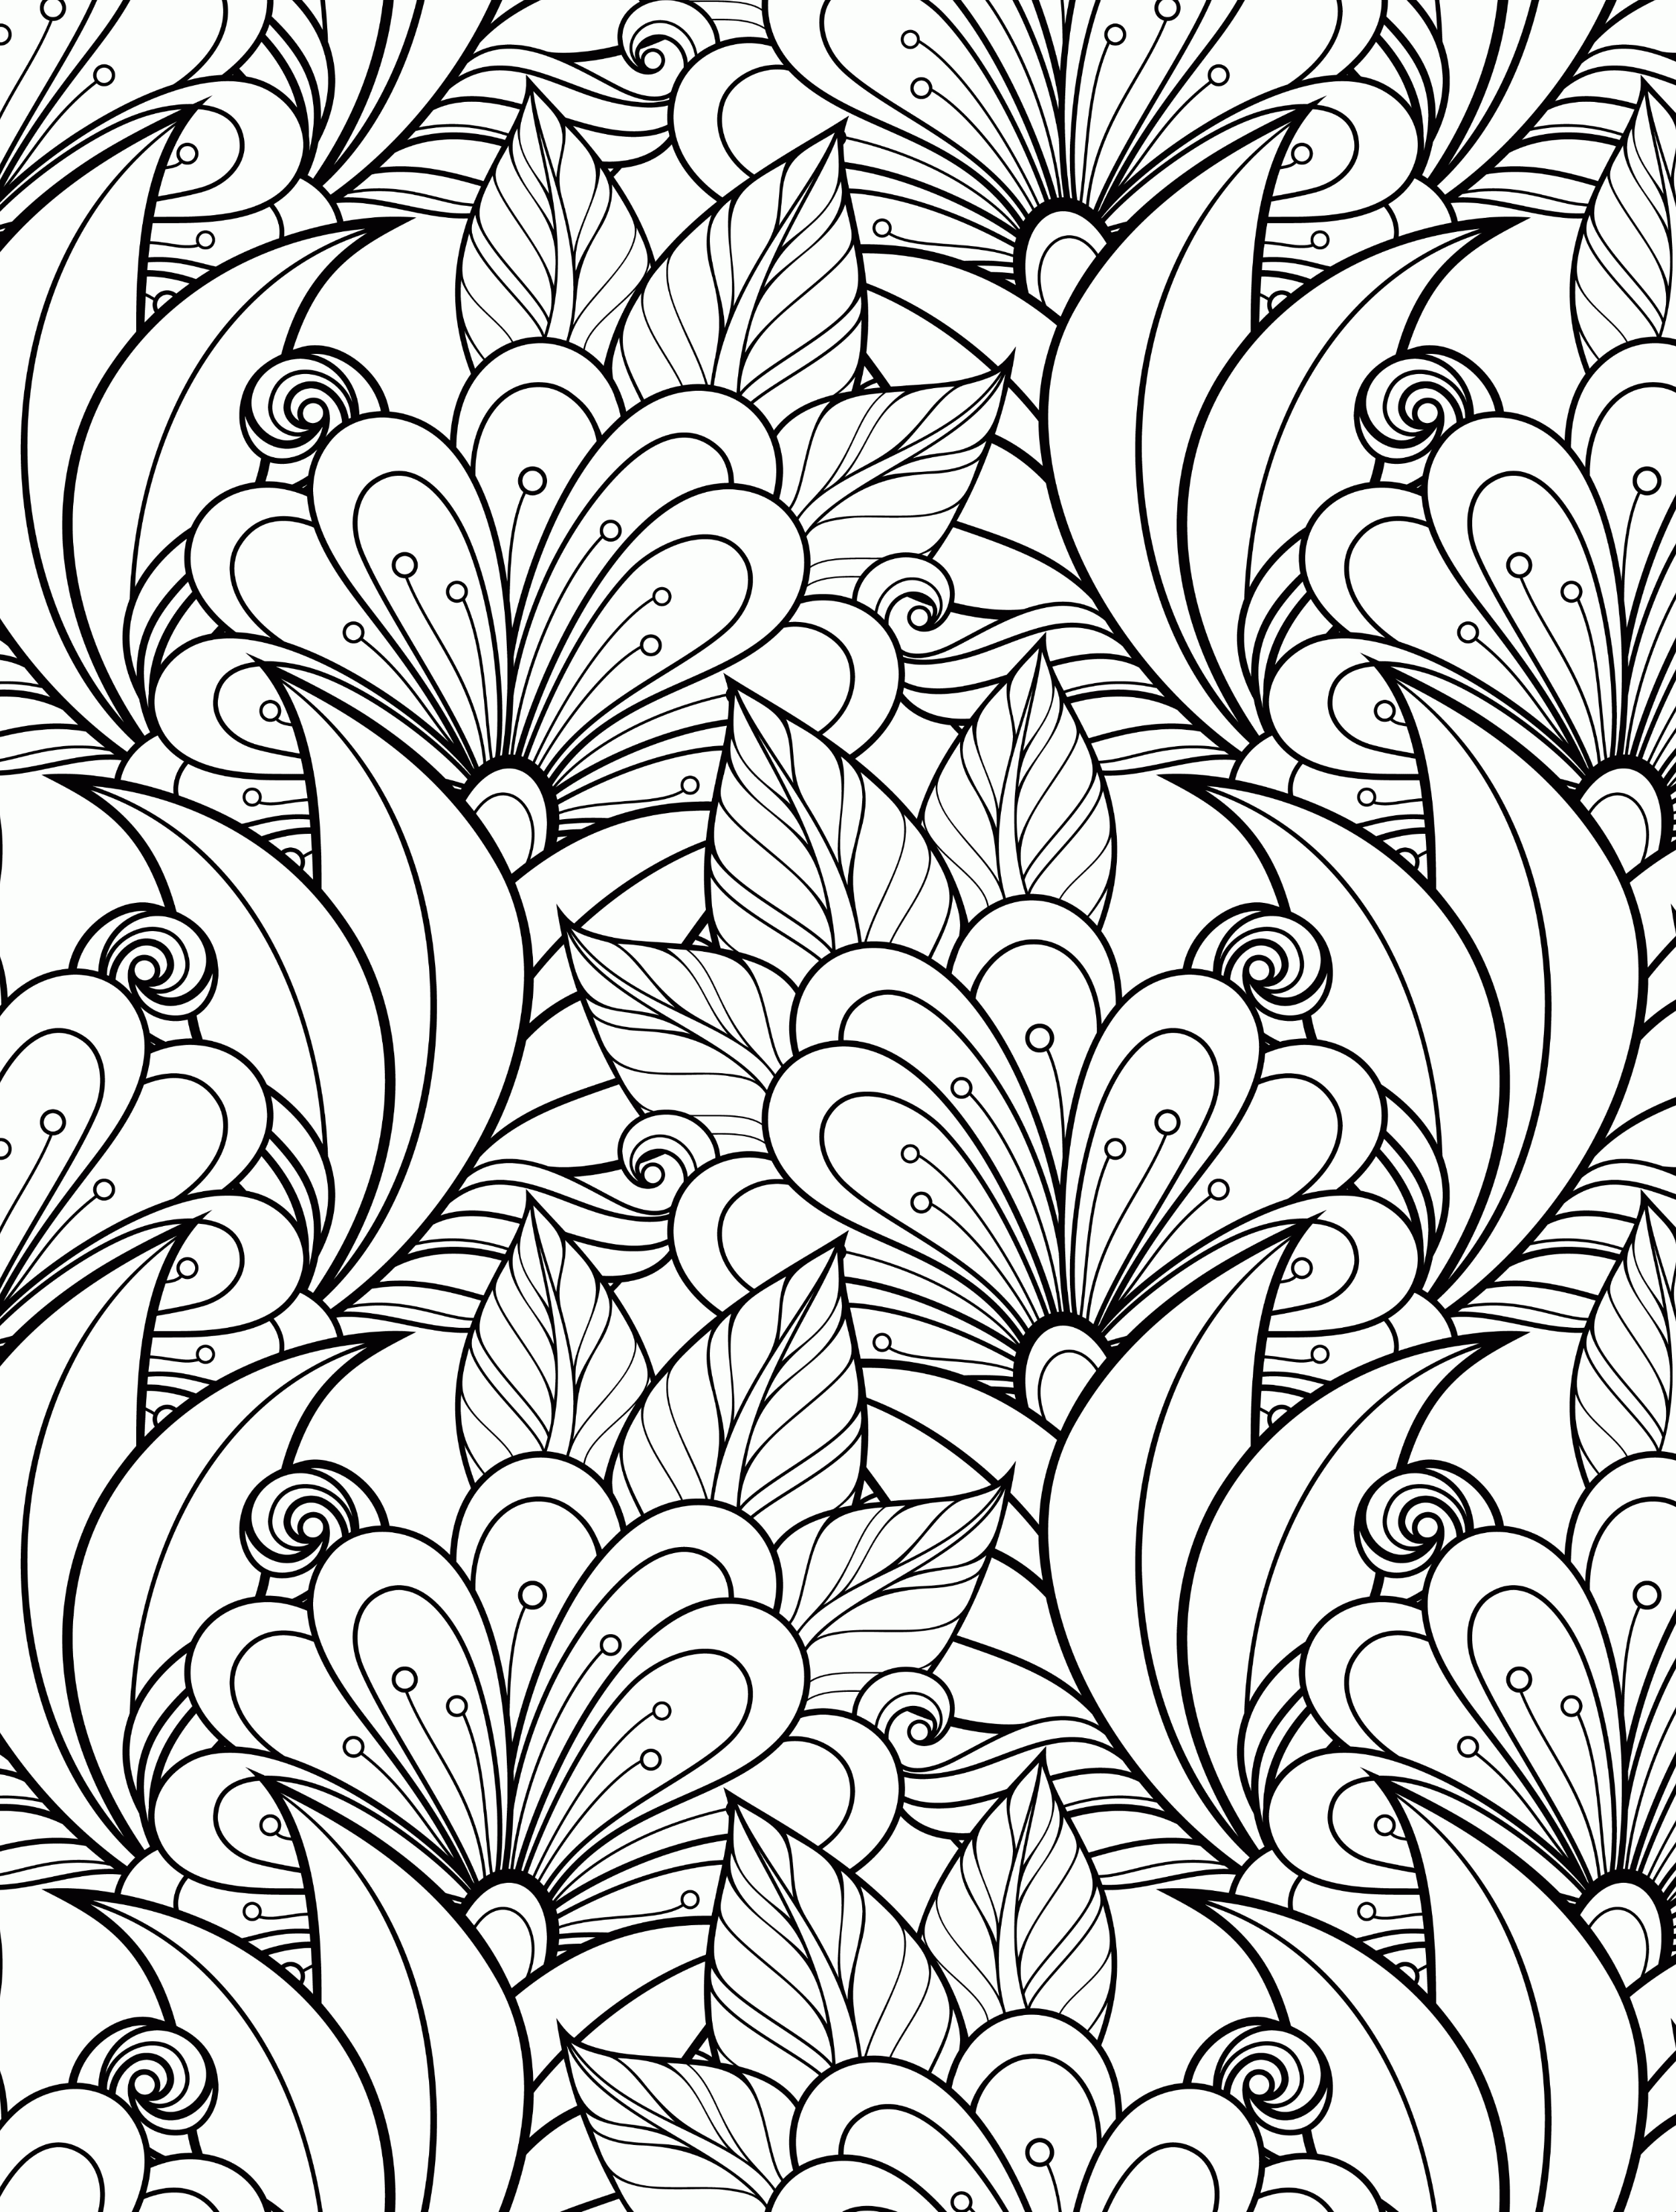 Download Free Printable Coloring Pages For Adults ...